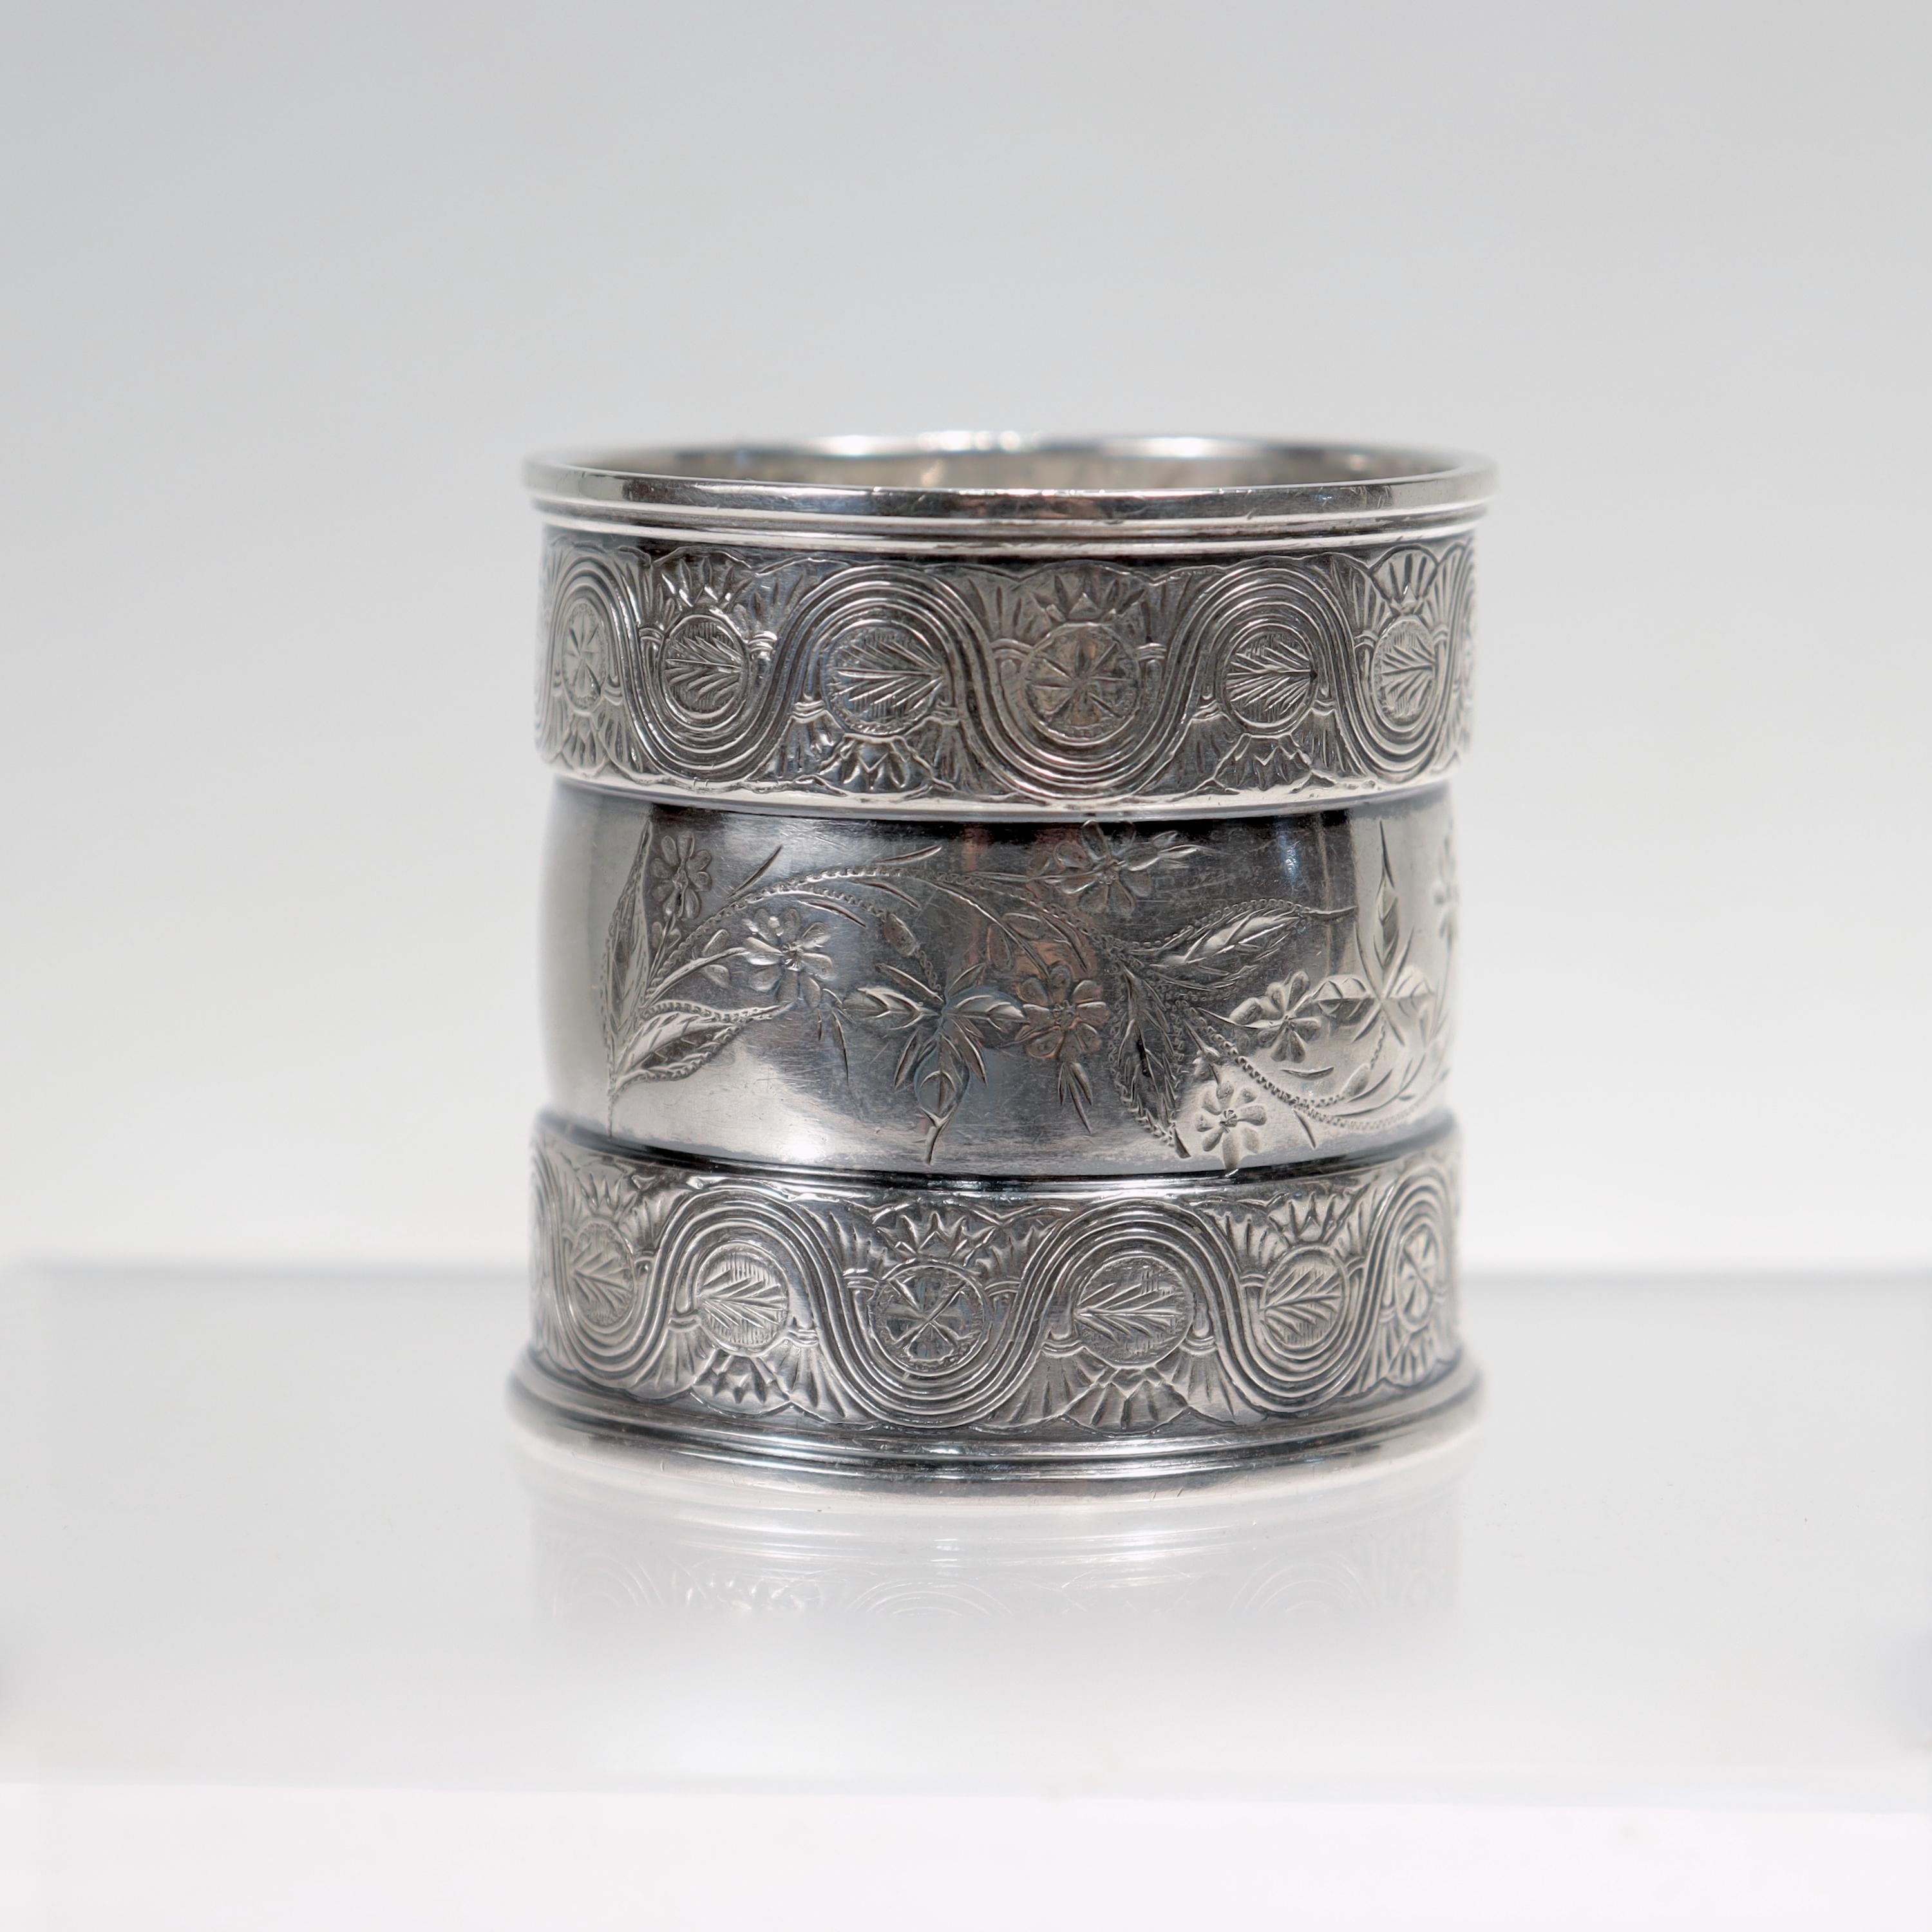 A fine antique Aesthetic Movement sterling silver napkin ring.

By Gorham.

With engraved floral devices to the center that is flanked on both sides by outer rings with intricate engraved line work.

Marked for Gorham / Sterling / 1490 / D to the